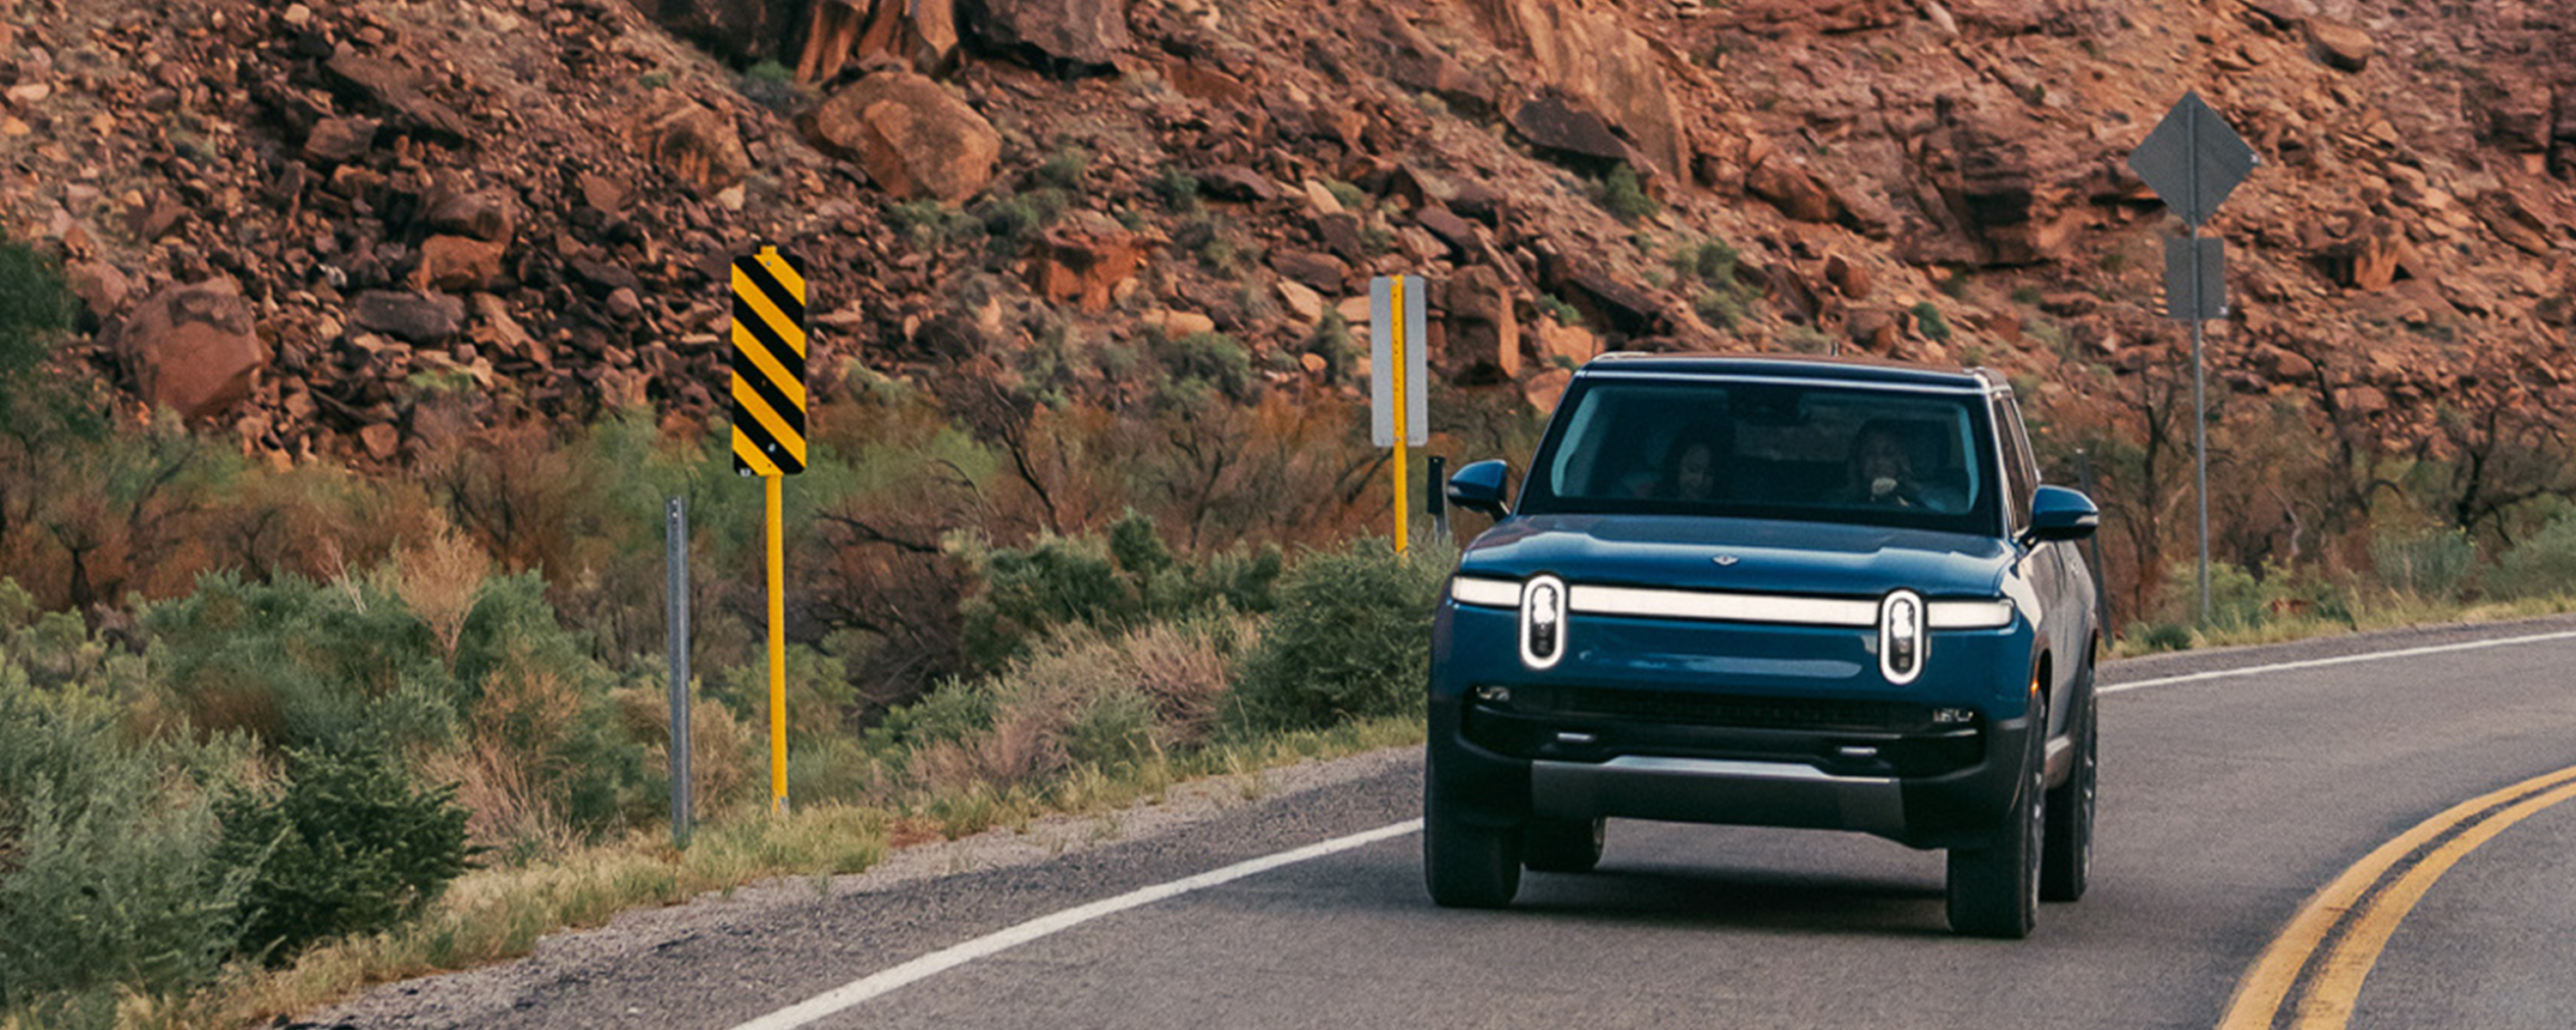 Used Rivian R1T Driving